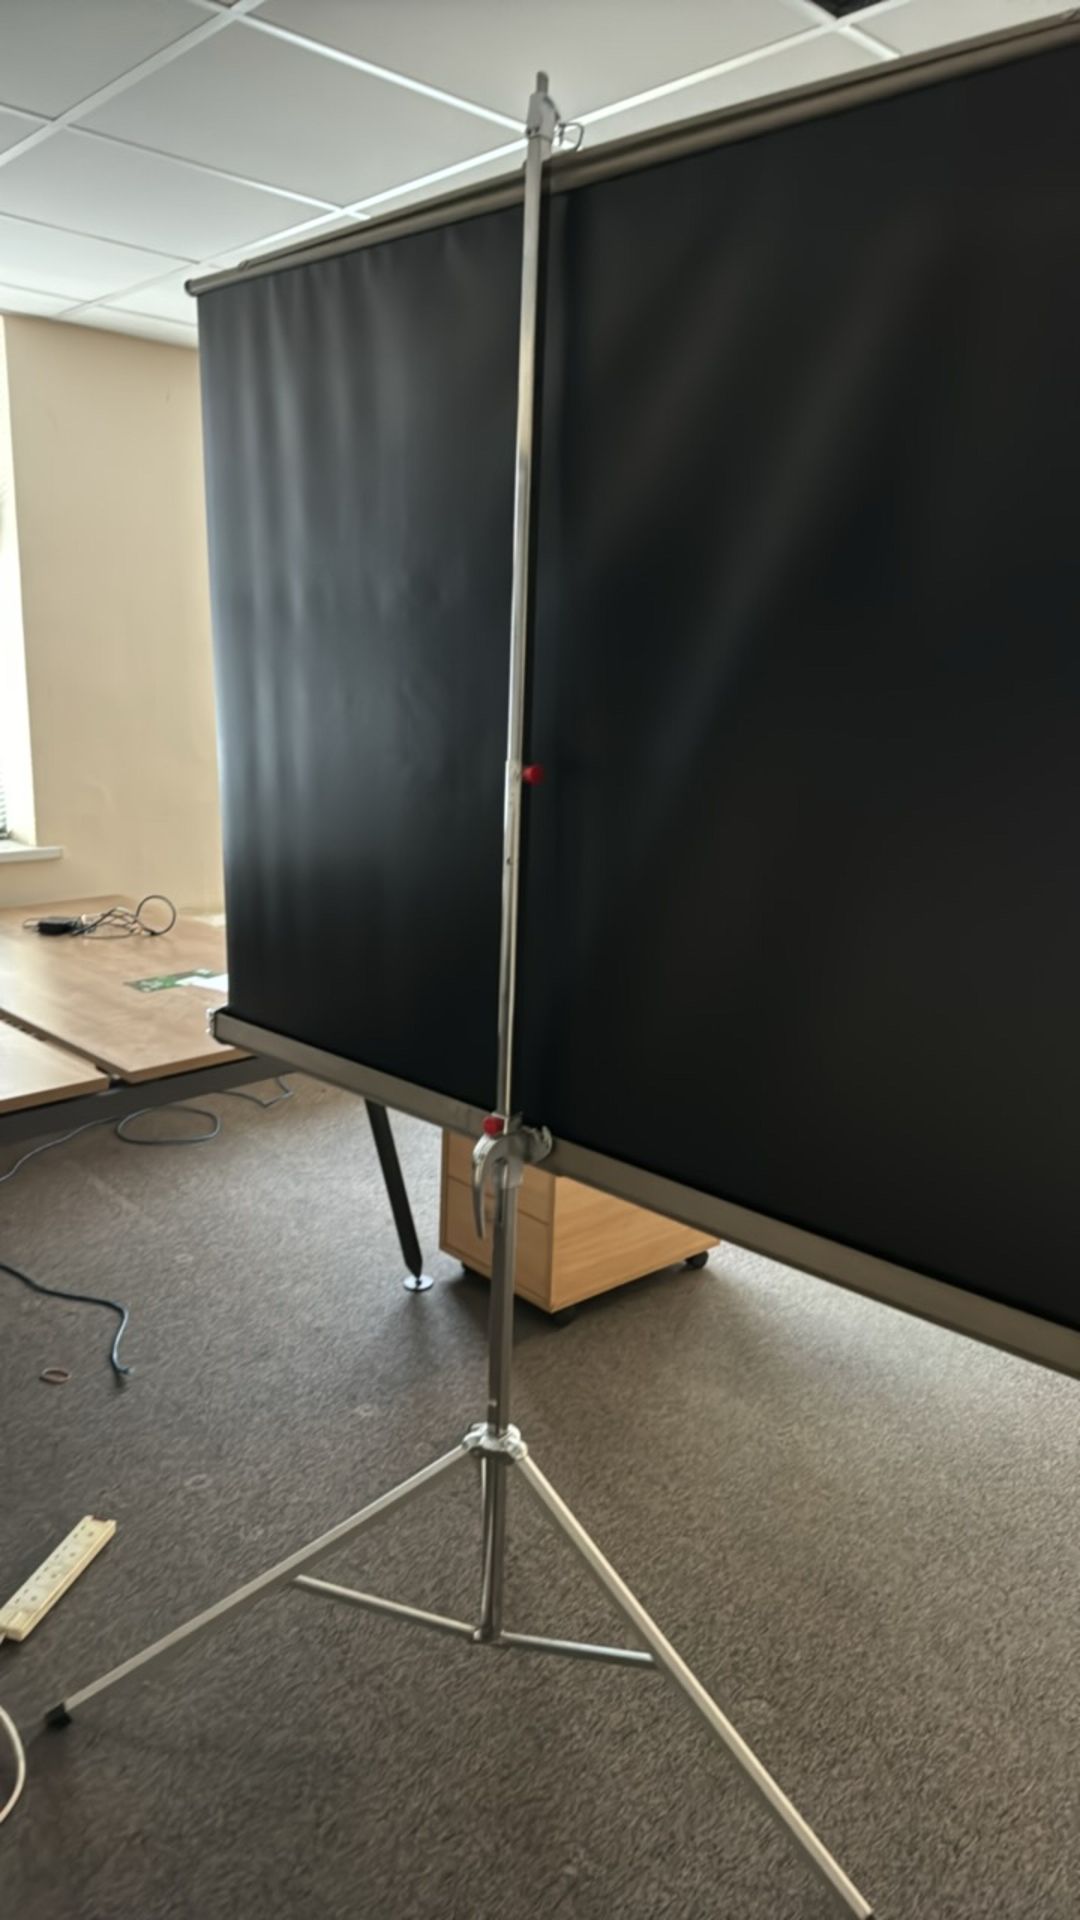 ref 180 - Harkness Miralyte Projector Screen & Stand - Image 6 of 6